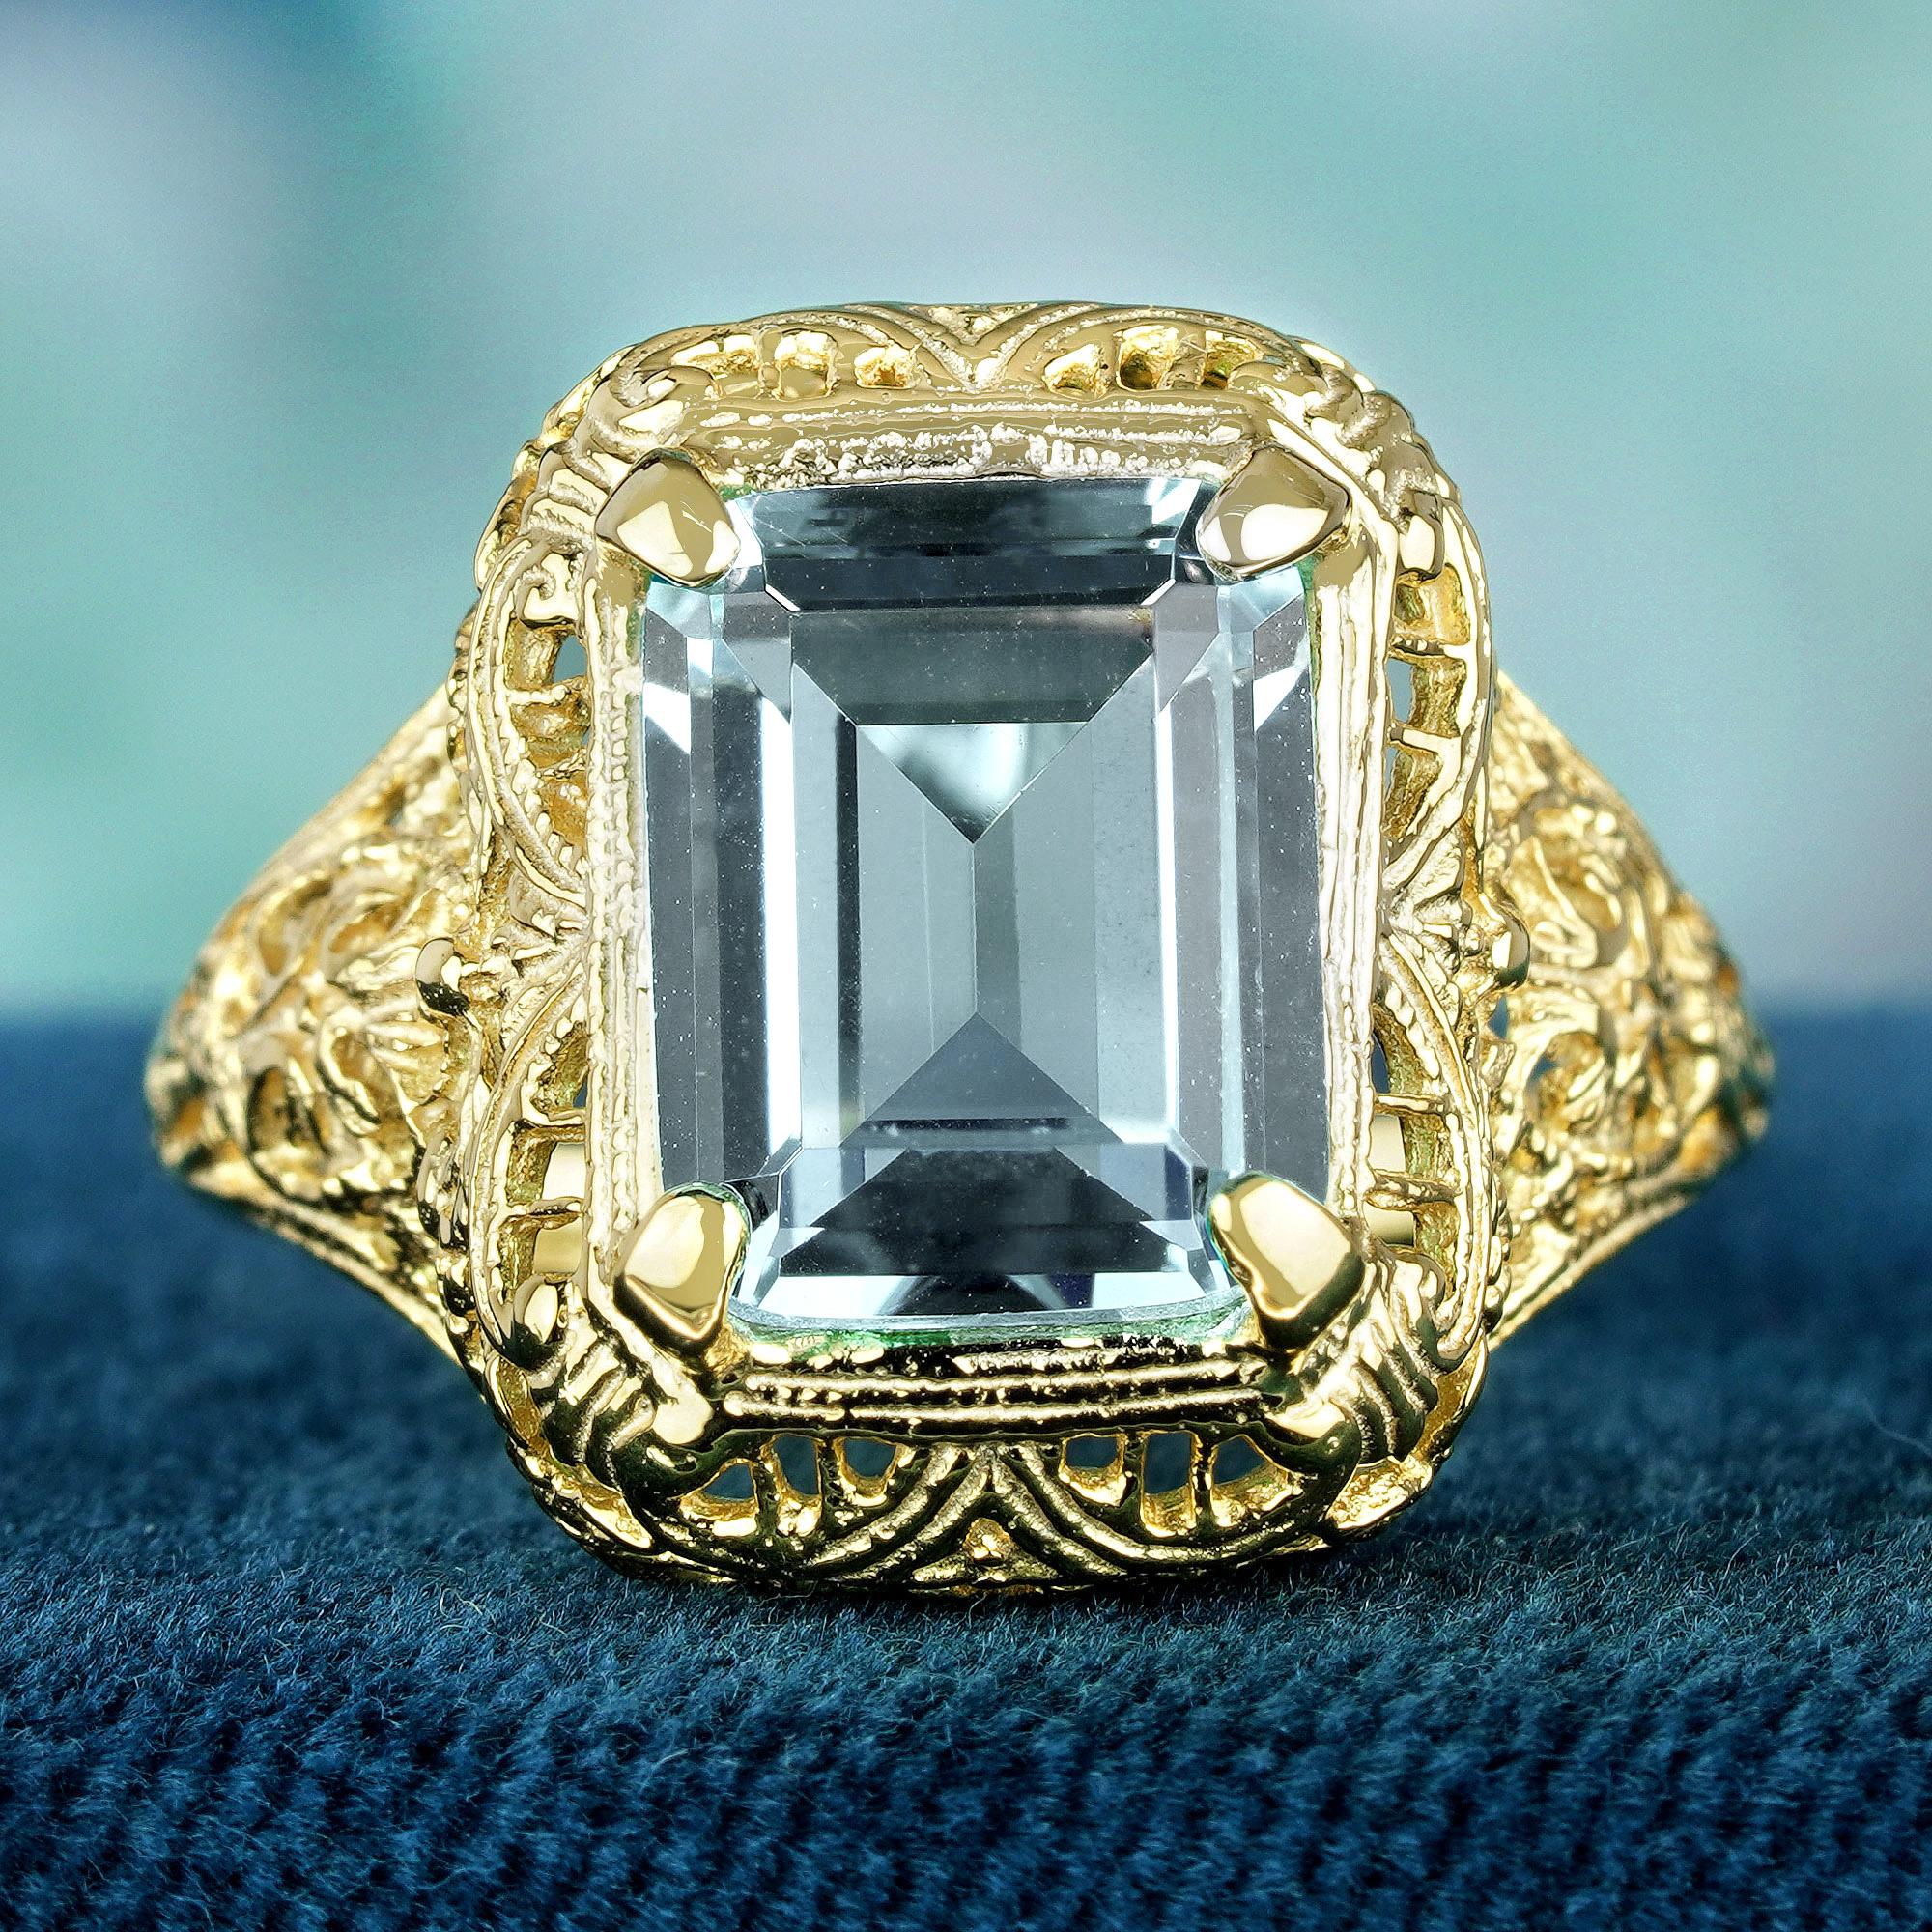 Dive into elegance with our Aquamarine Vintage Style Filigree Ring in yellow gold. Adorned with a captivating emerald-cut aquamarine stone, its serene aqua blue hue mesmerizes the senses. Crafted with intricate filigree detailing, this ring exudes